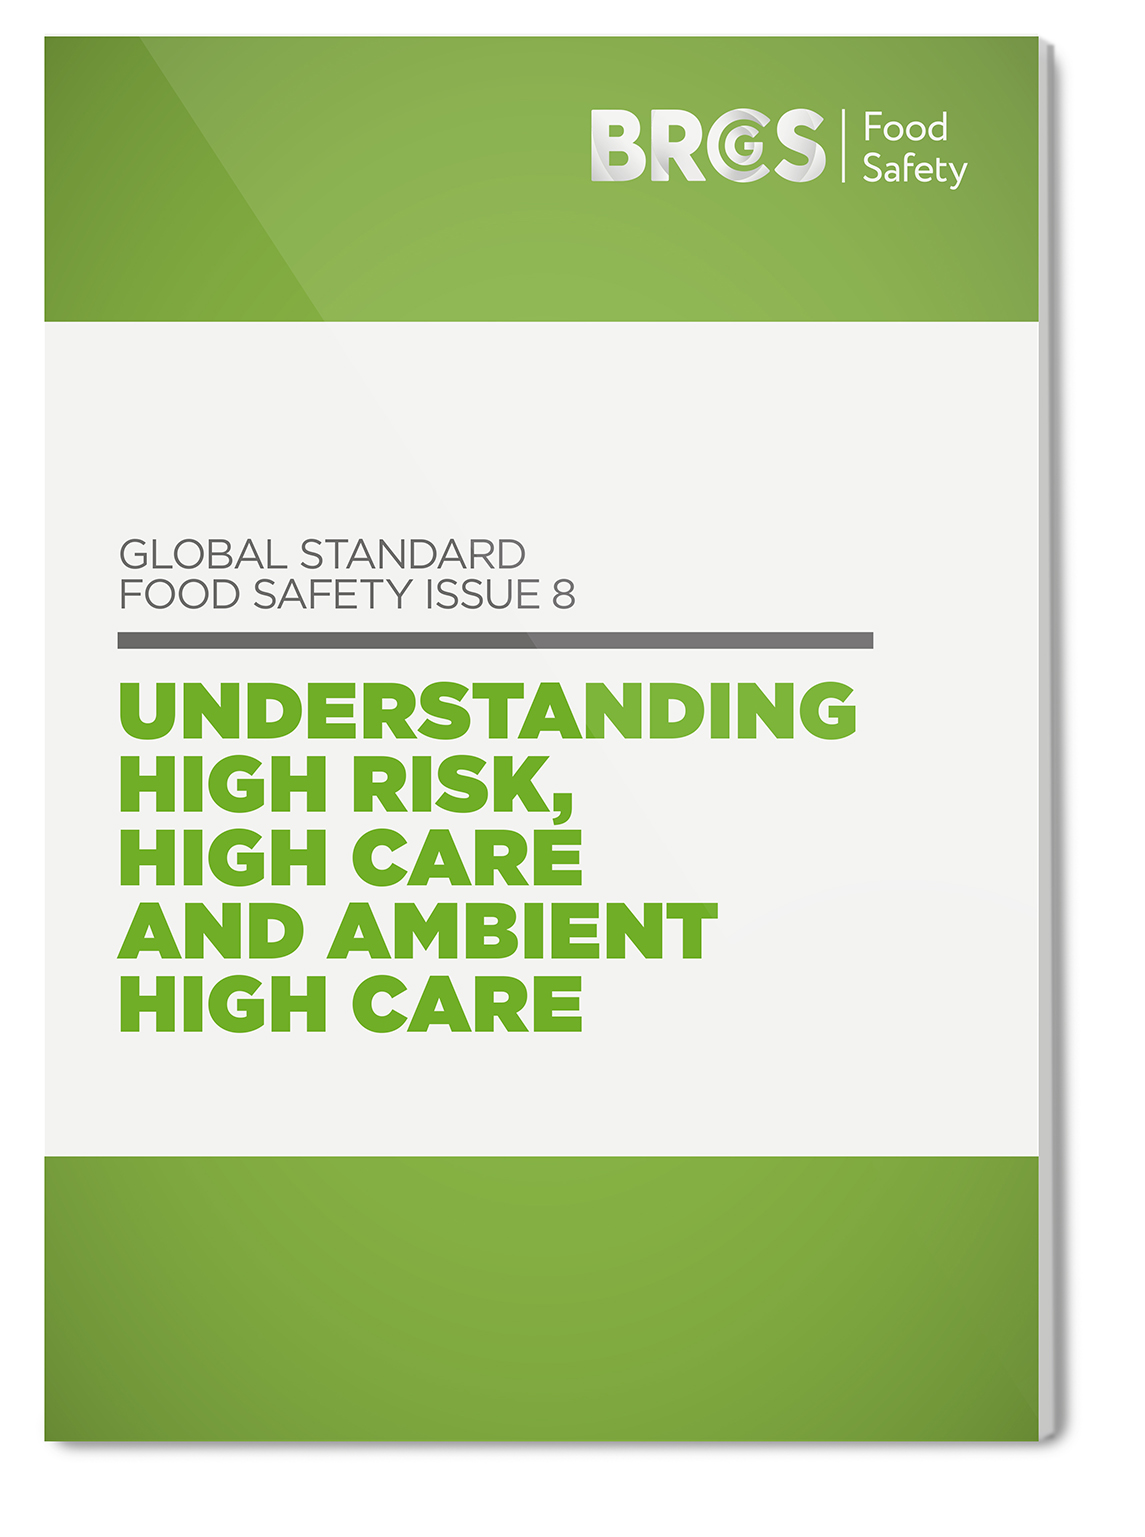 Understanding High Risk, High Care and Ambient High Care